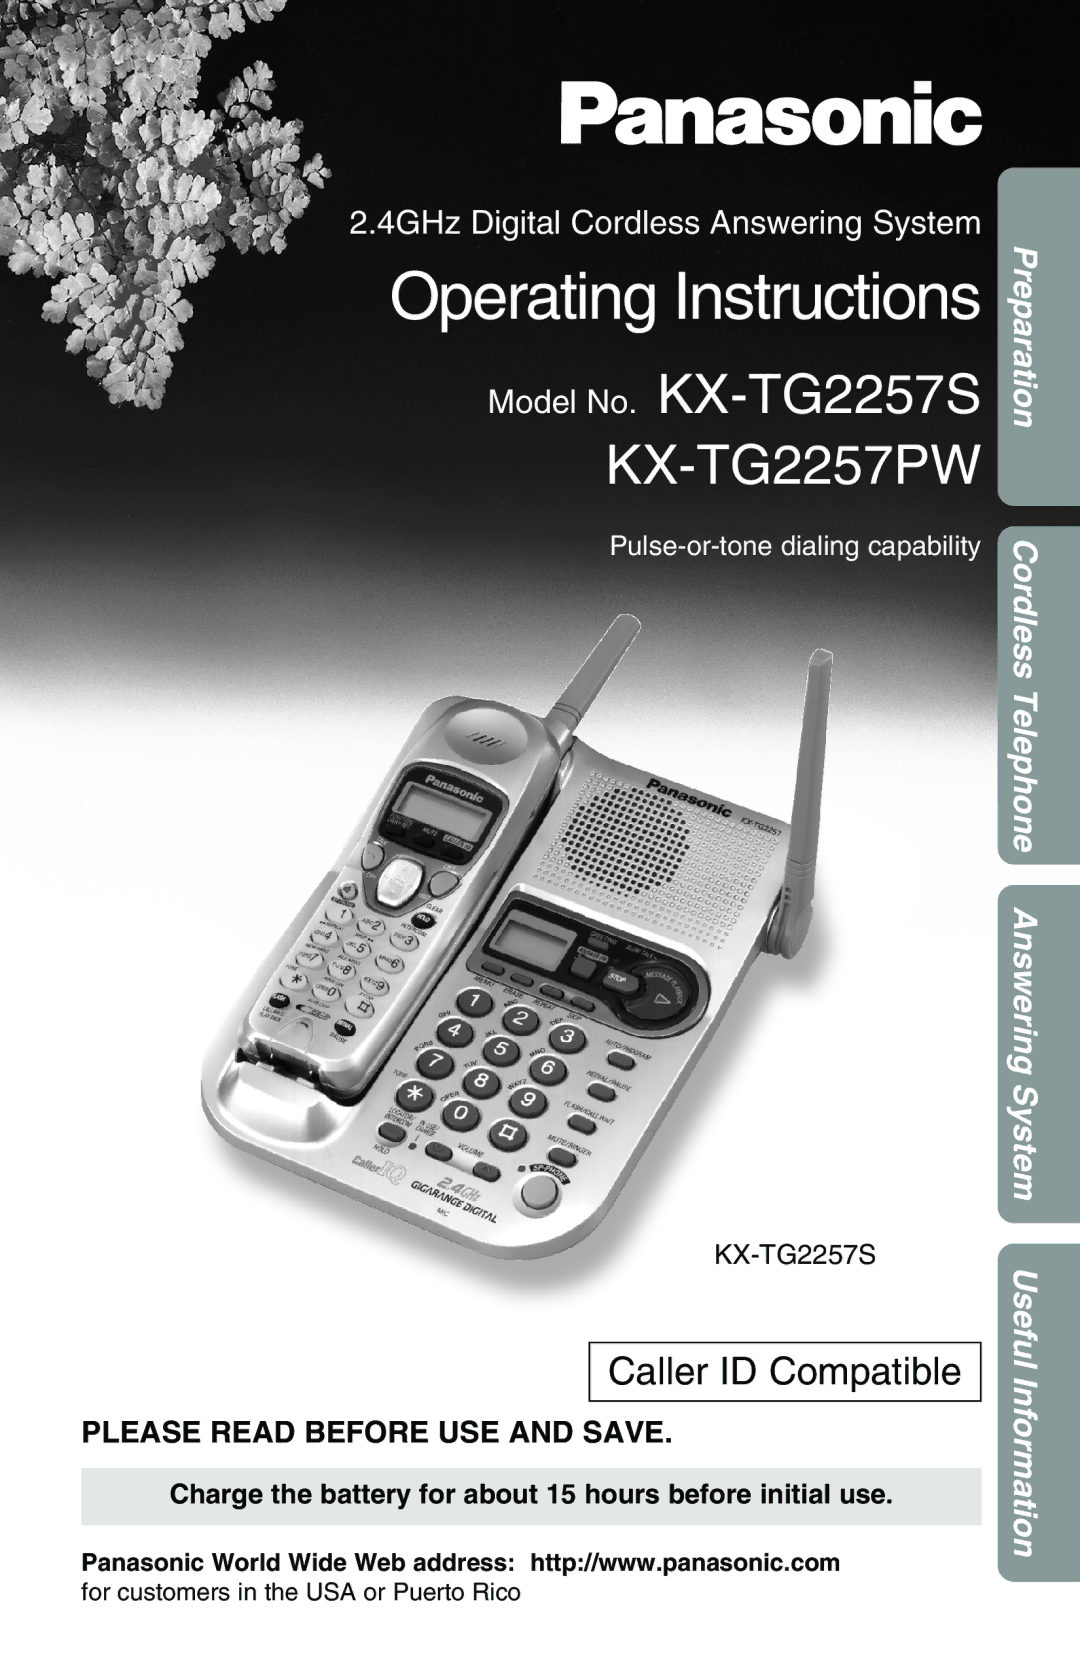 Panasonic KX-TG2257PW, KX-TG2257S operating instructions Charge the battery for about 15 hours before initial use 